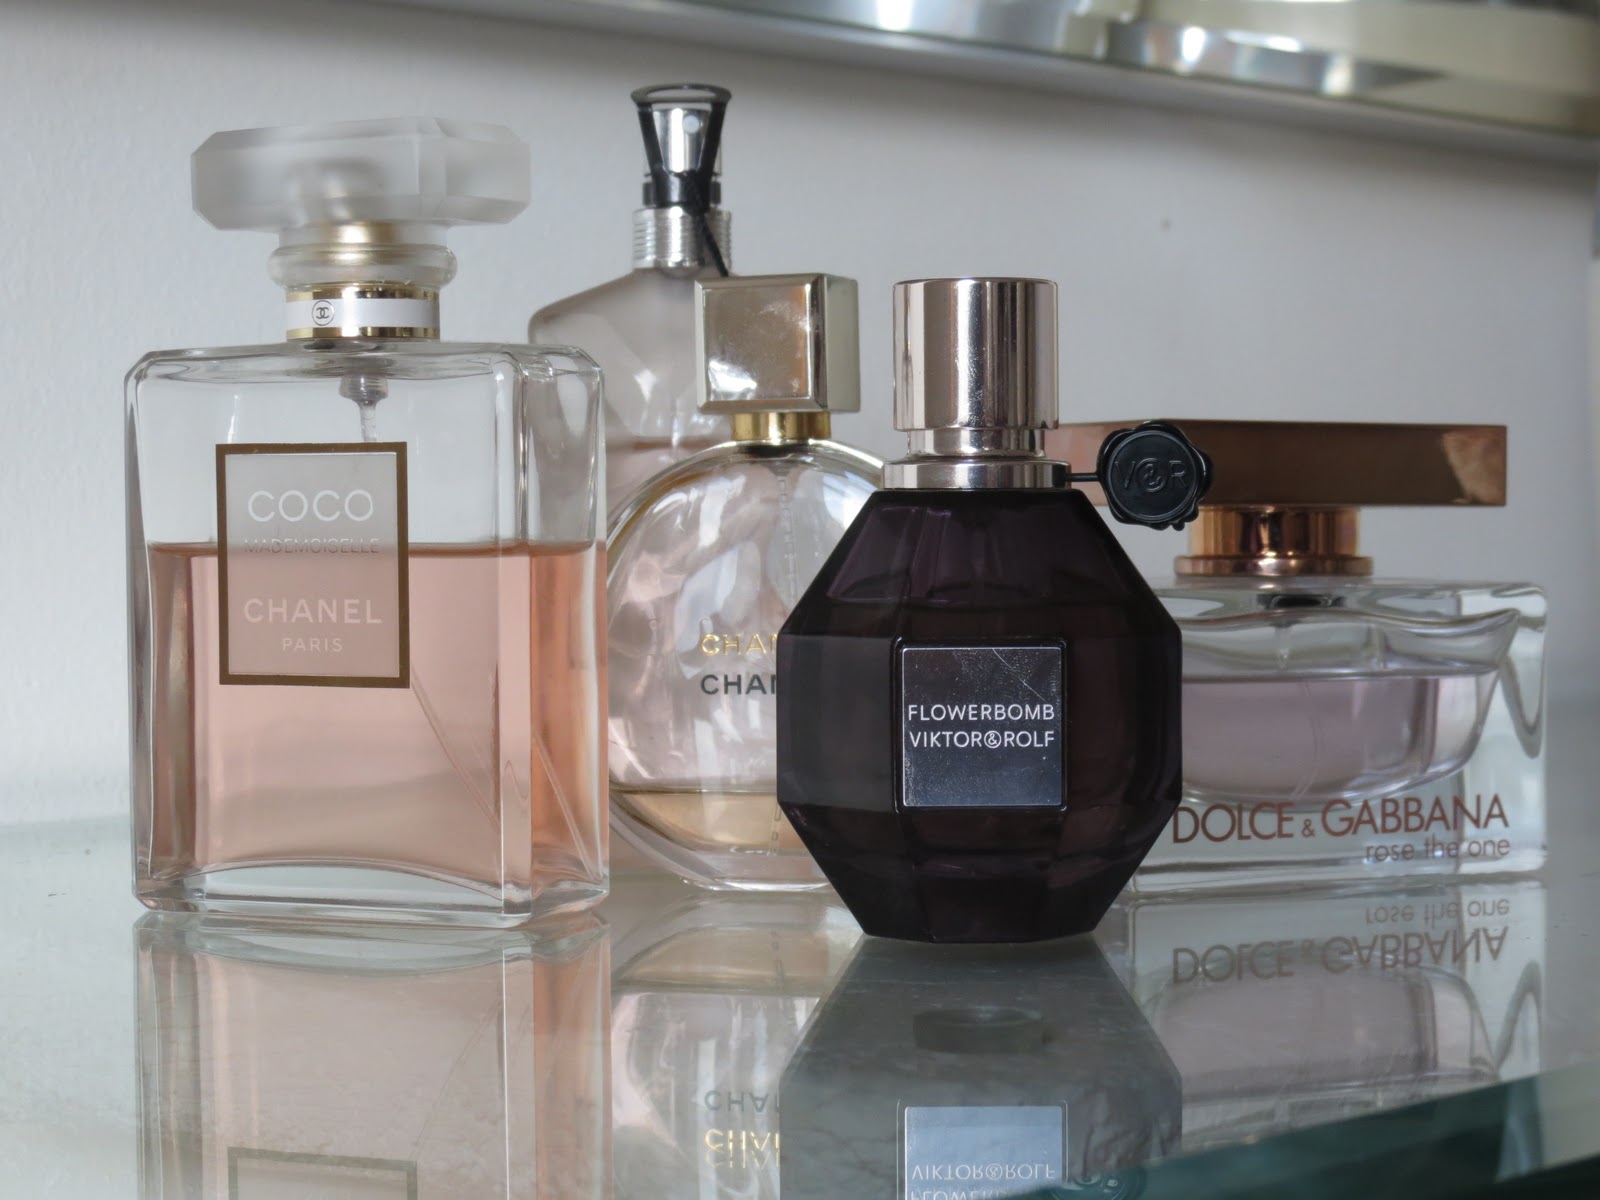 Style is my thing: Perfume